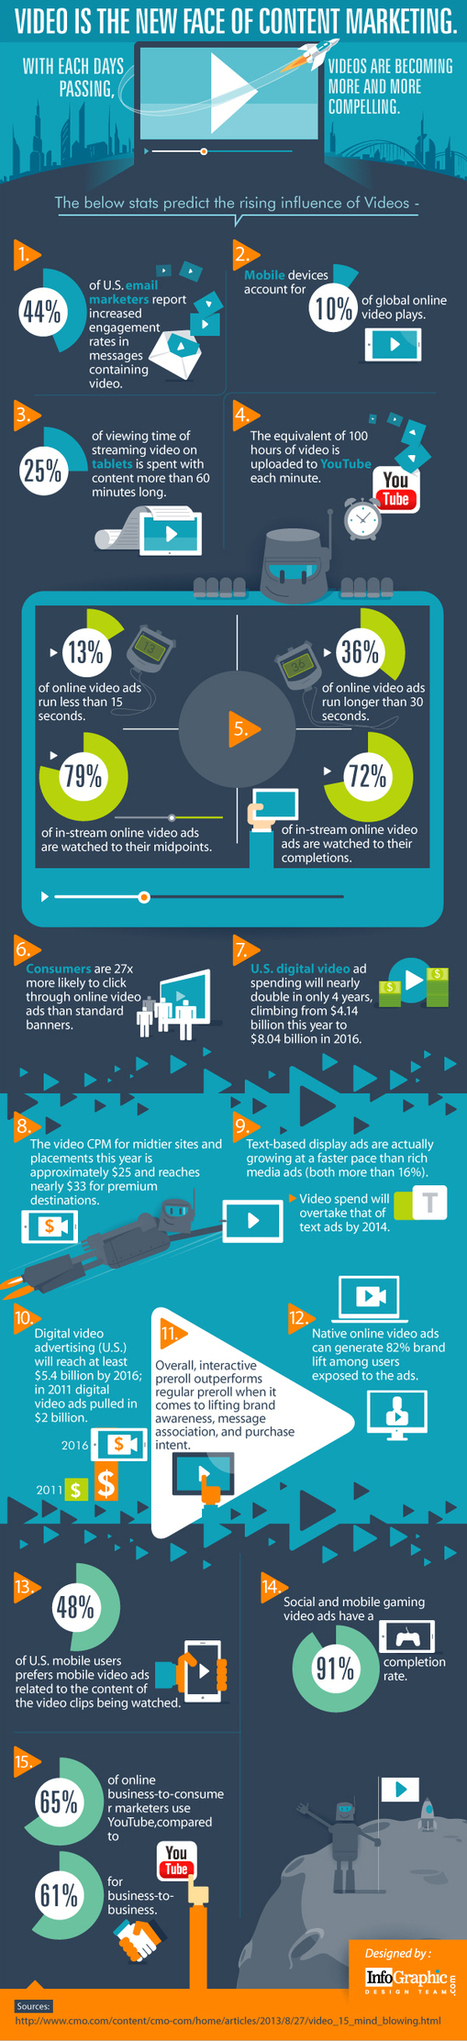 Video Is the New Face of Content Marketing [Infographic] | digital marketing strategy | Scoop.it